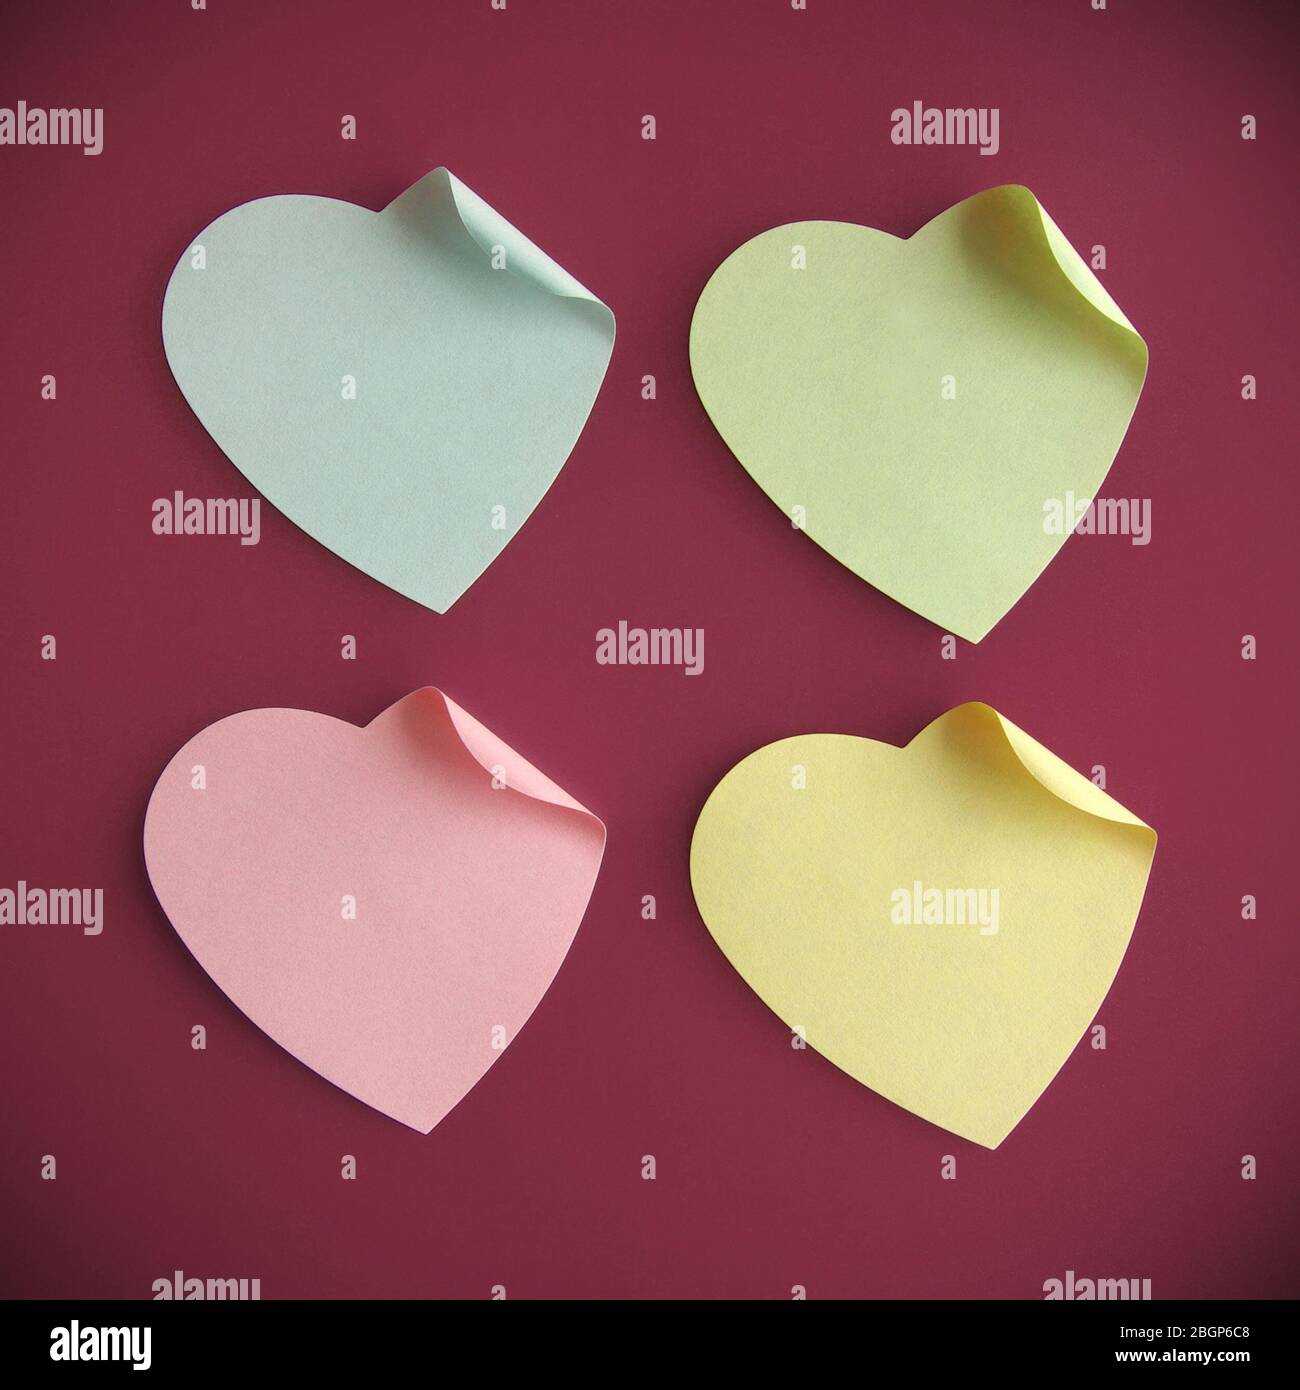 73518707 - background of four heart-shaped colourful note over fainted red Stock Photo